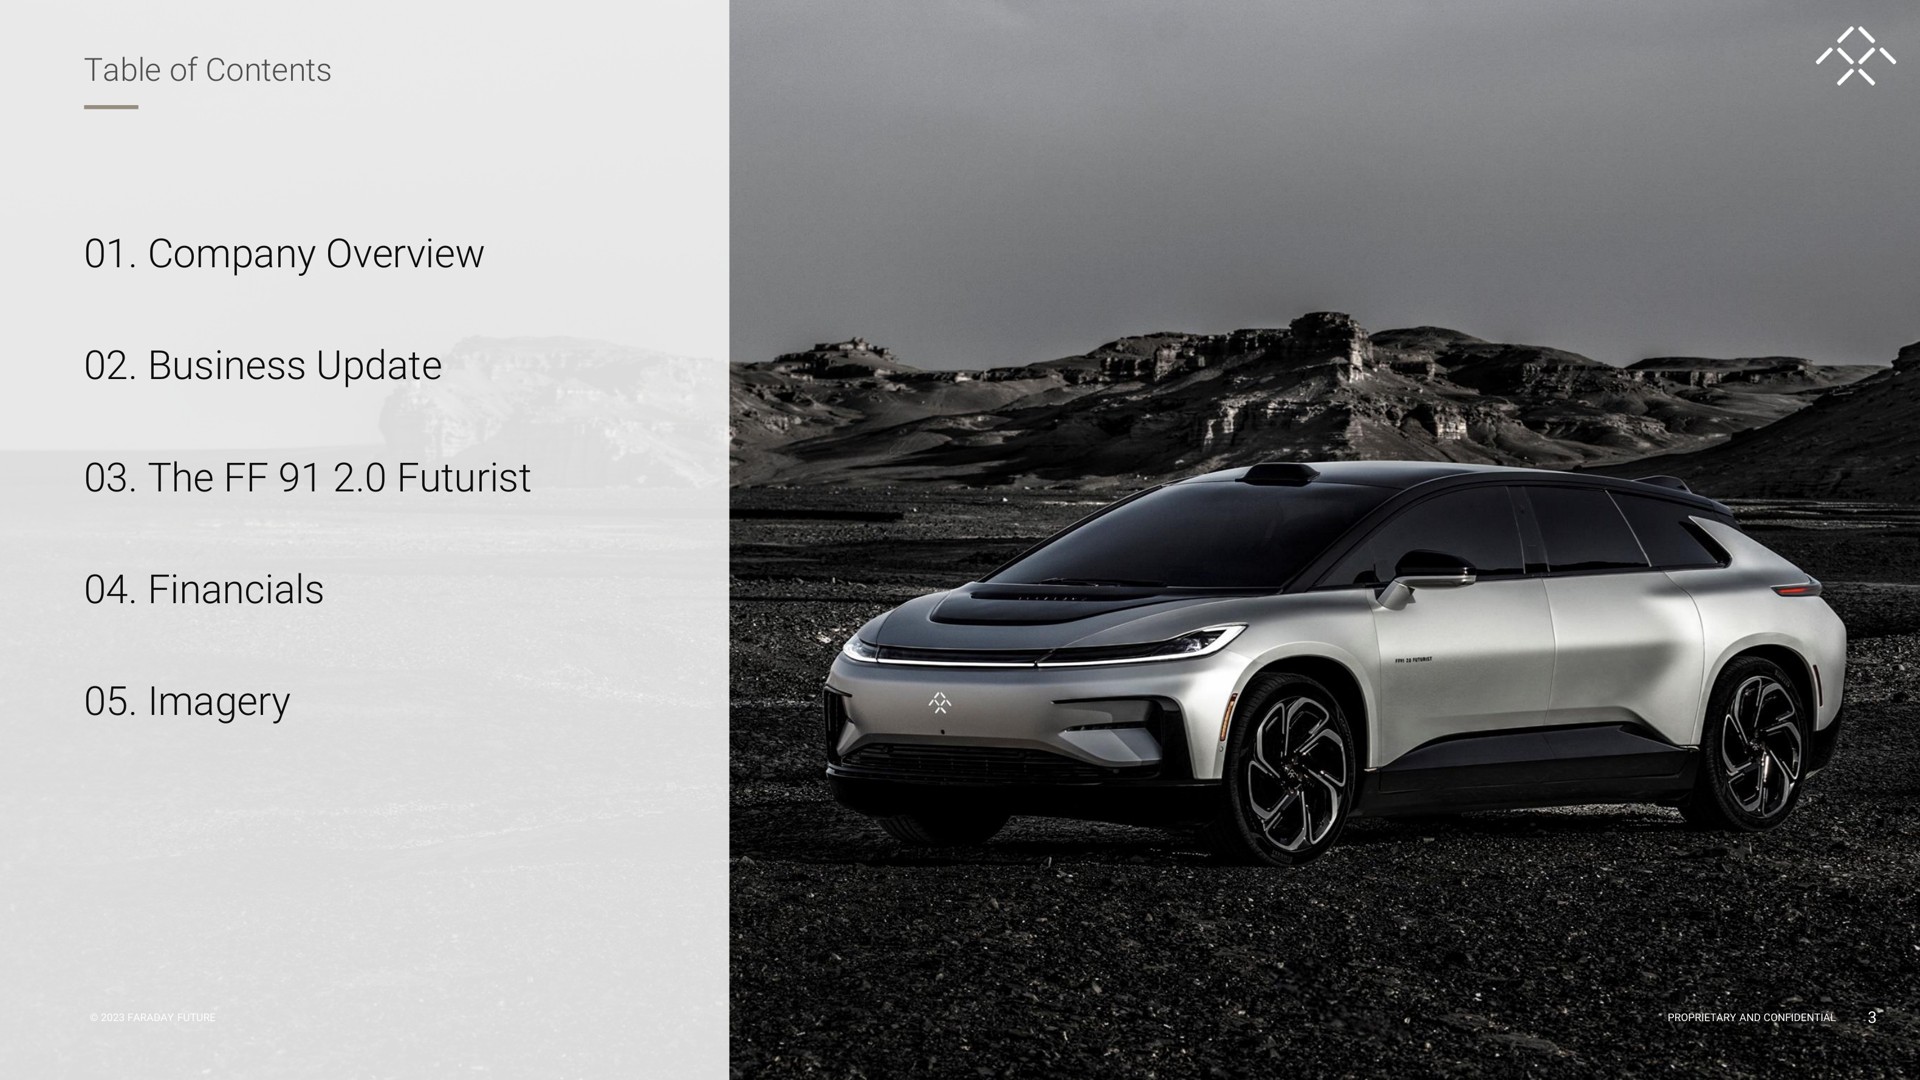 table of contents company overview business update the futurist imagery | Faraday Future